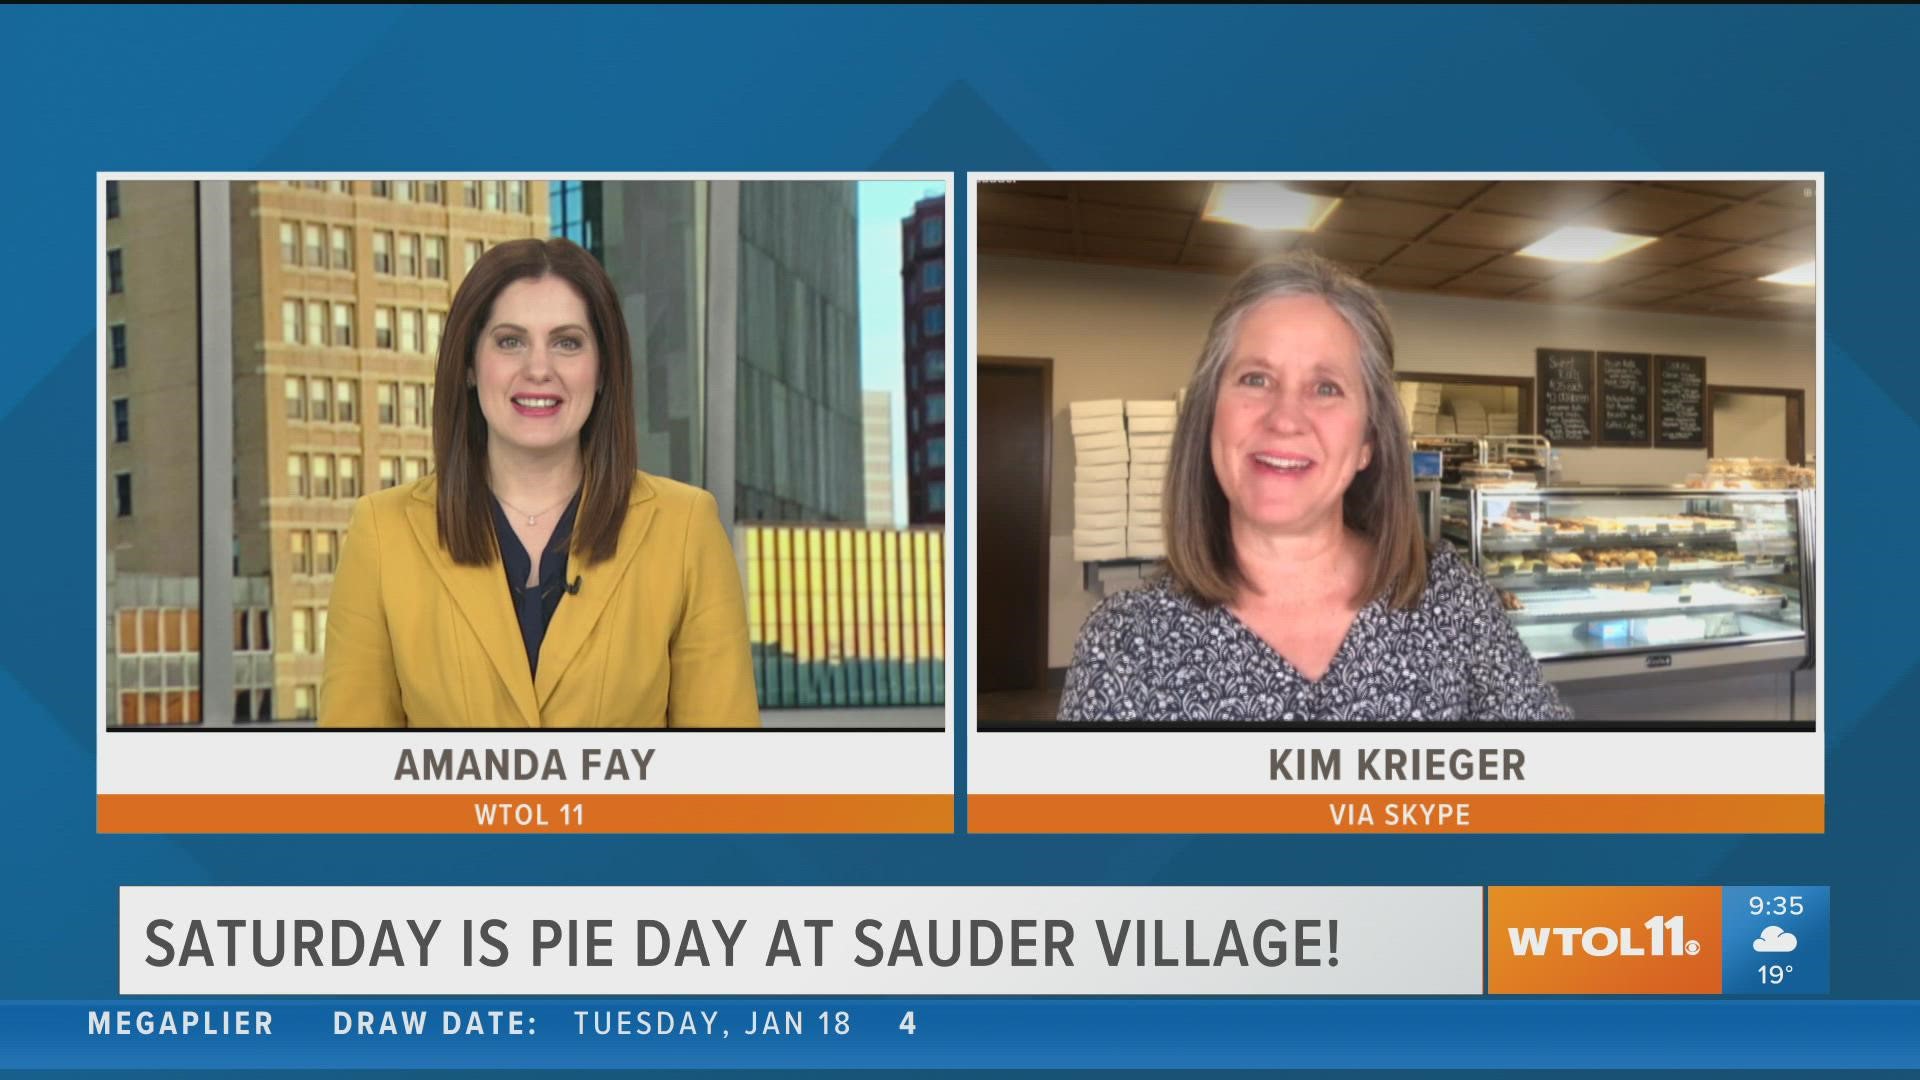 Sunday is Pie Day — so why not celebrate local? Sauder Village is getting in on the action a day early with special deals and samples on Saturday, Jan. 22.